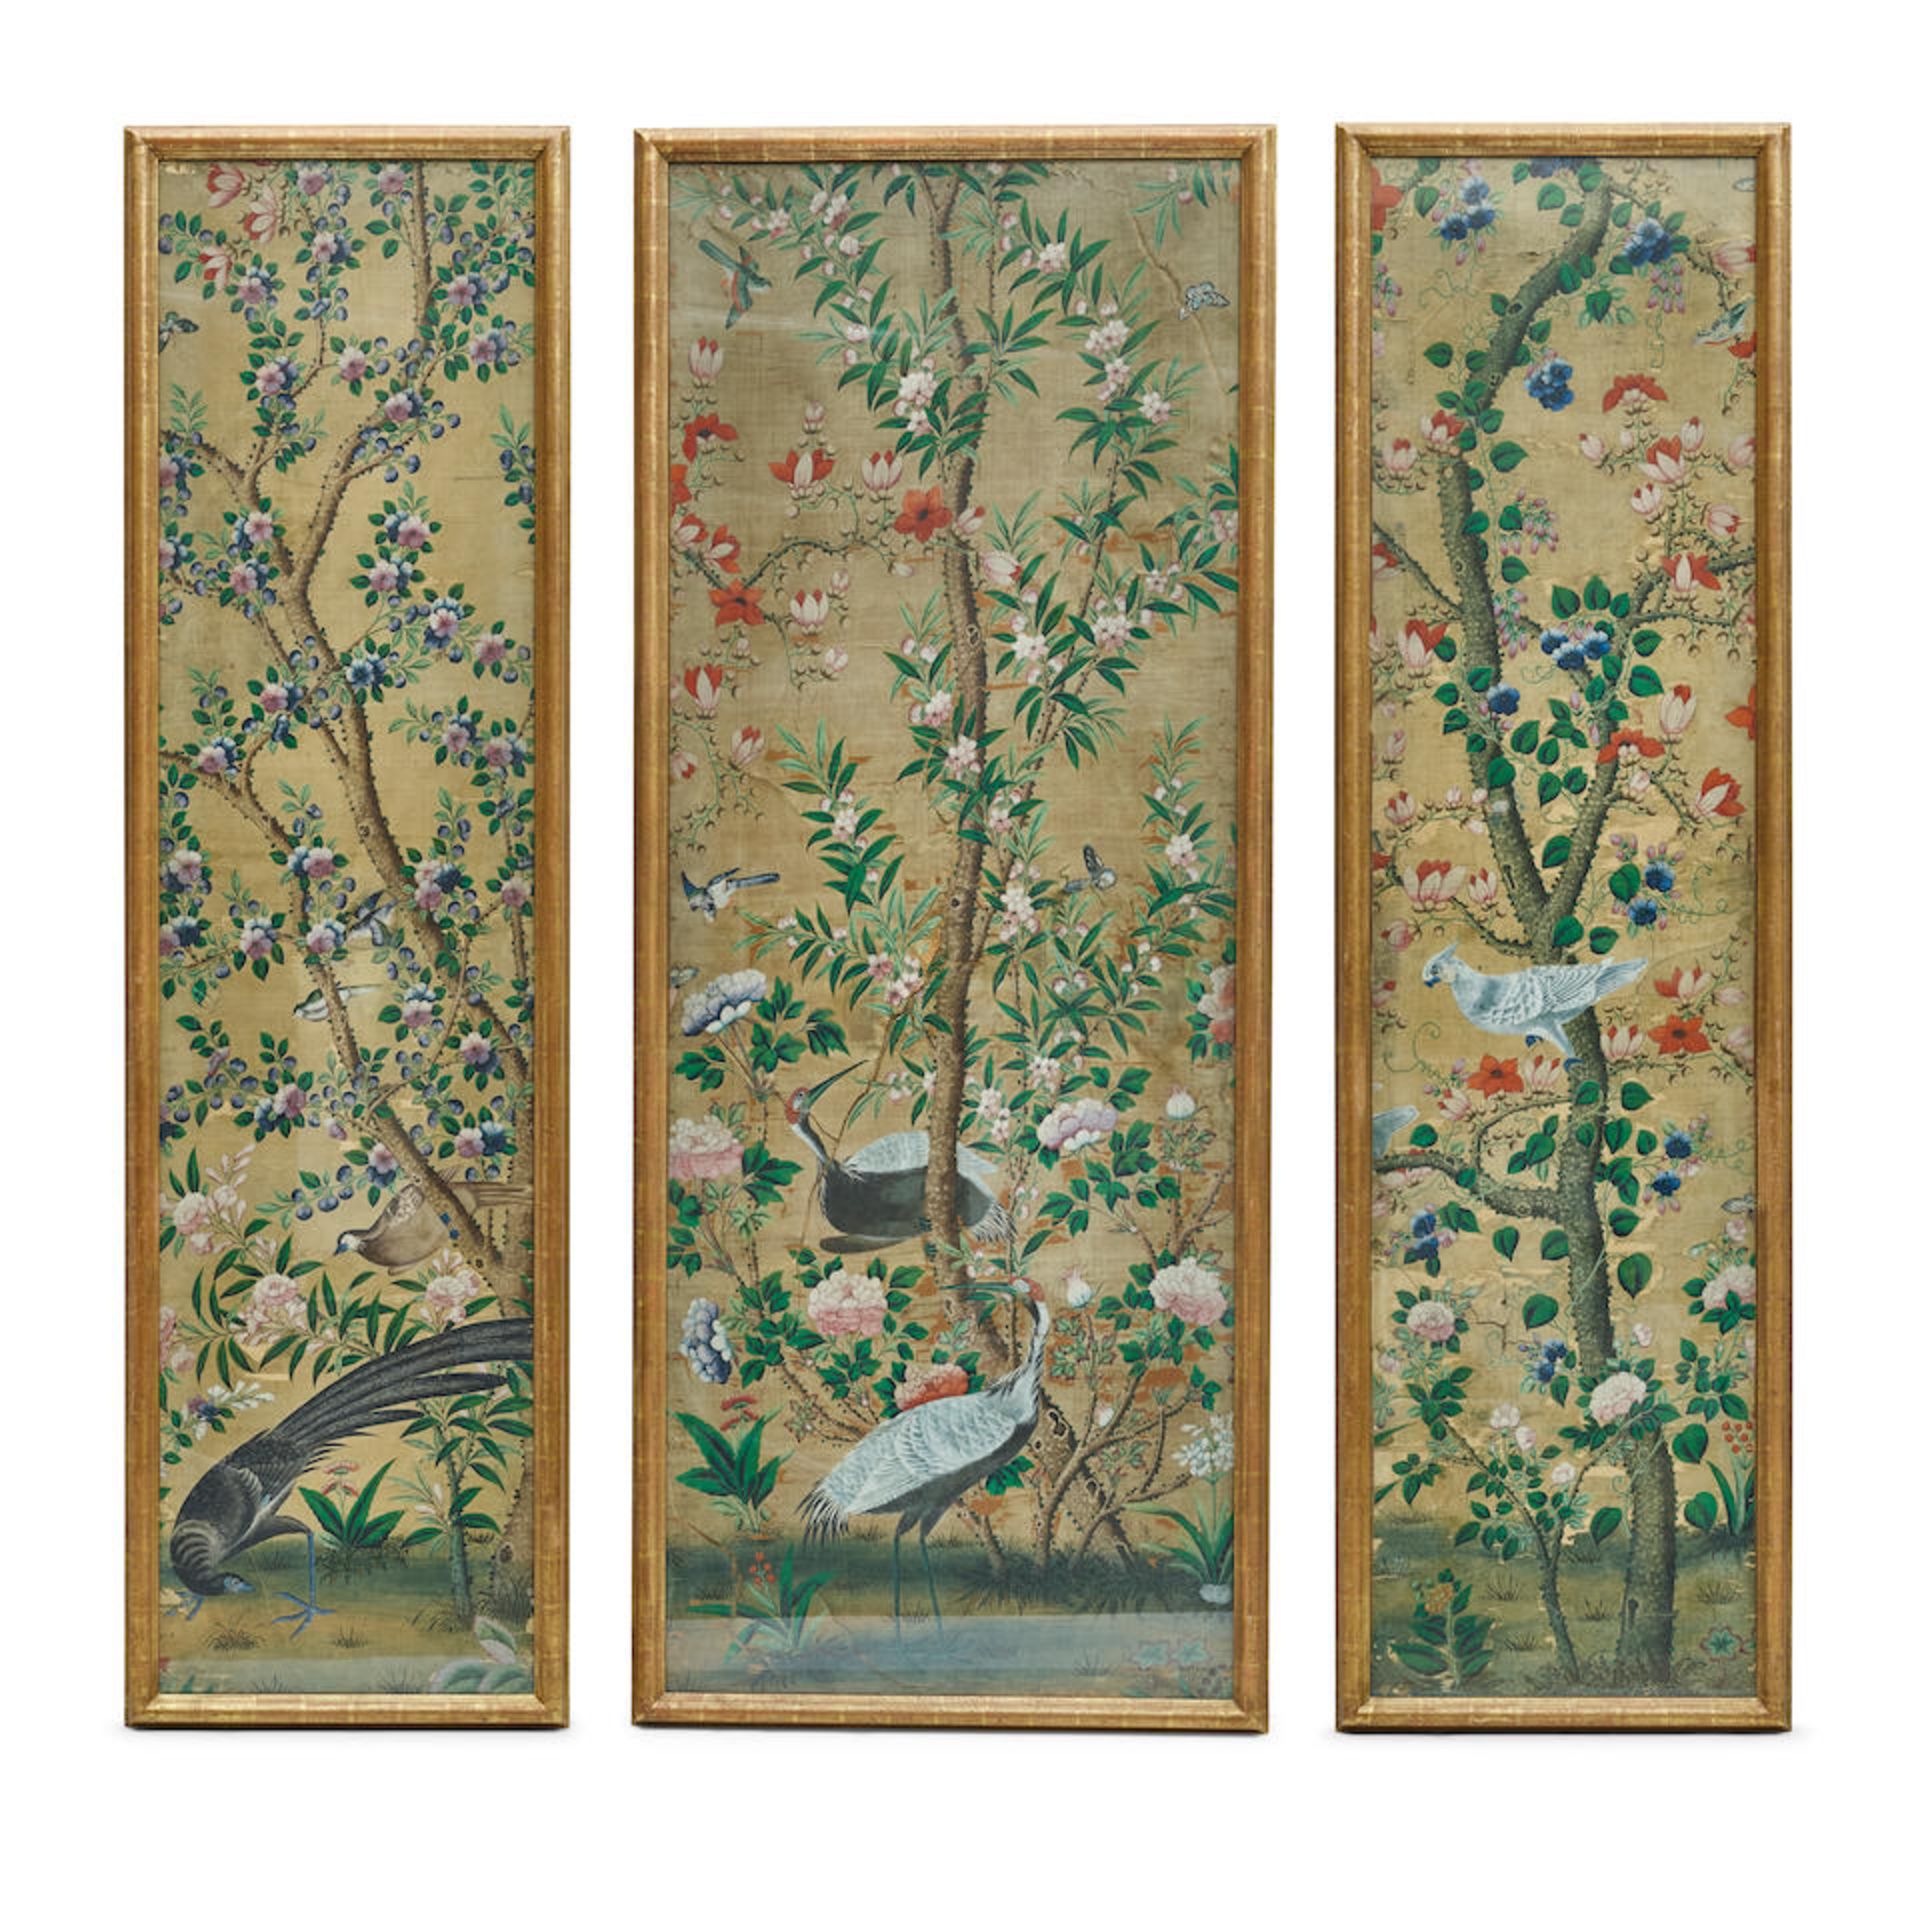 A SET OF THREE FRAMED PAINTINGS ON SILKLate 18th century